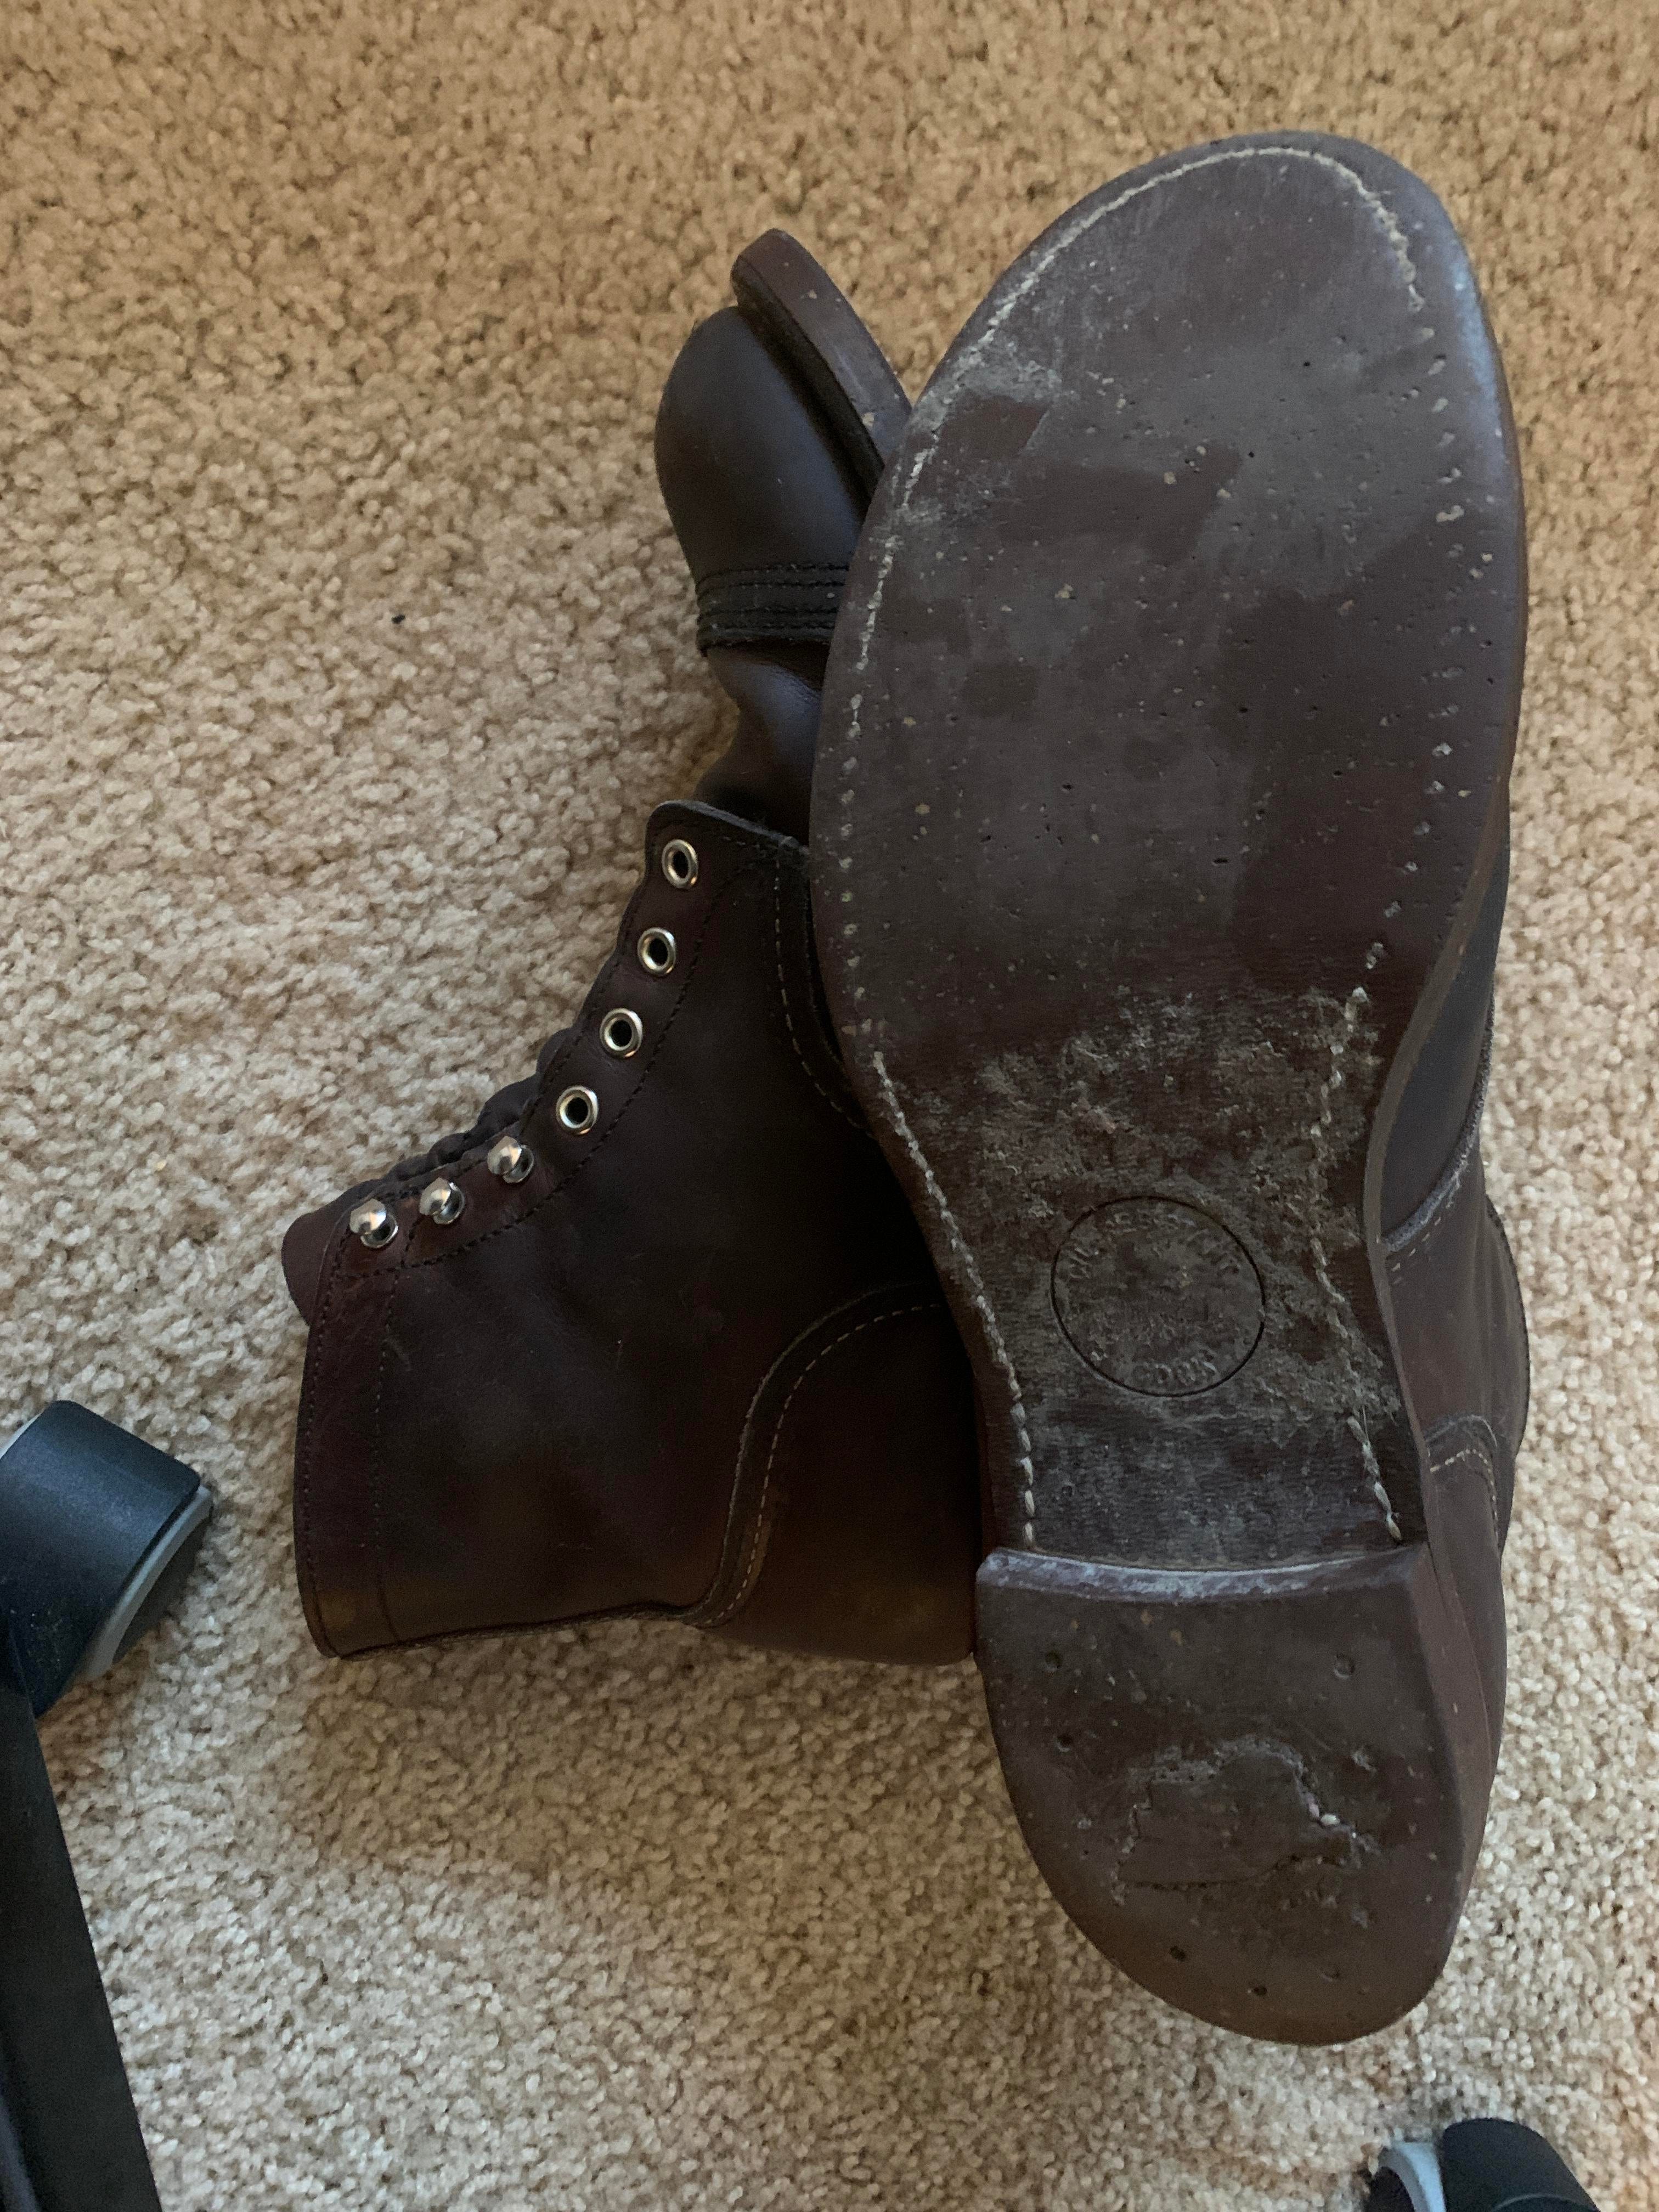 Dyed my brown Redwings black (pics included) : r/goodyearwelt